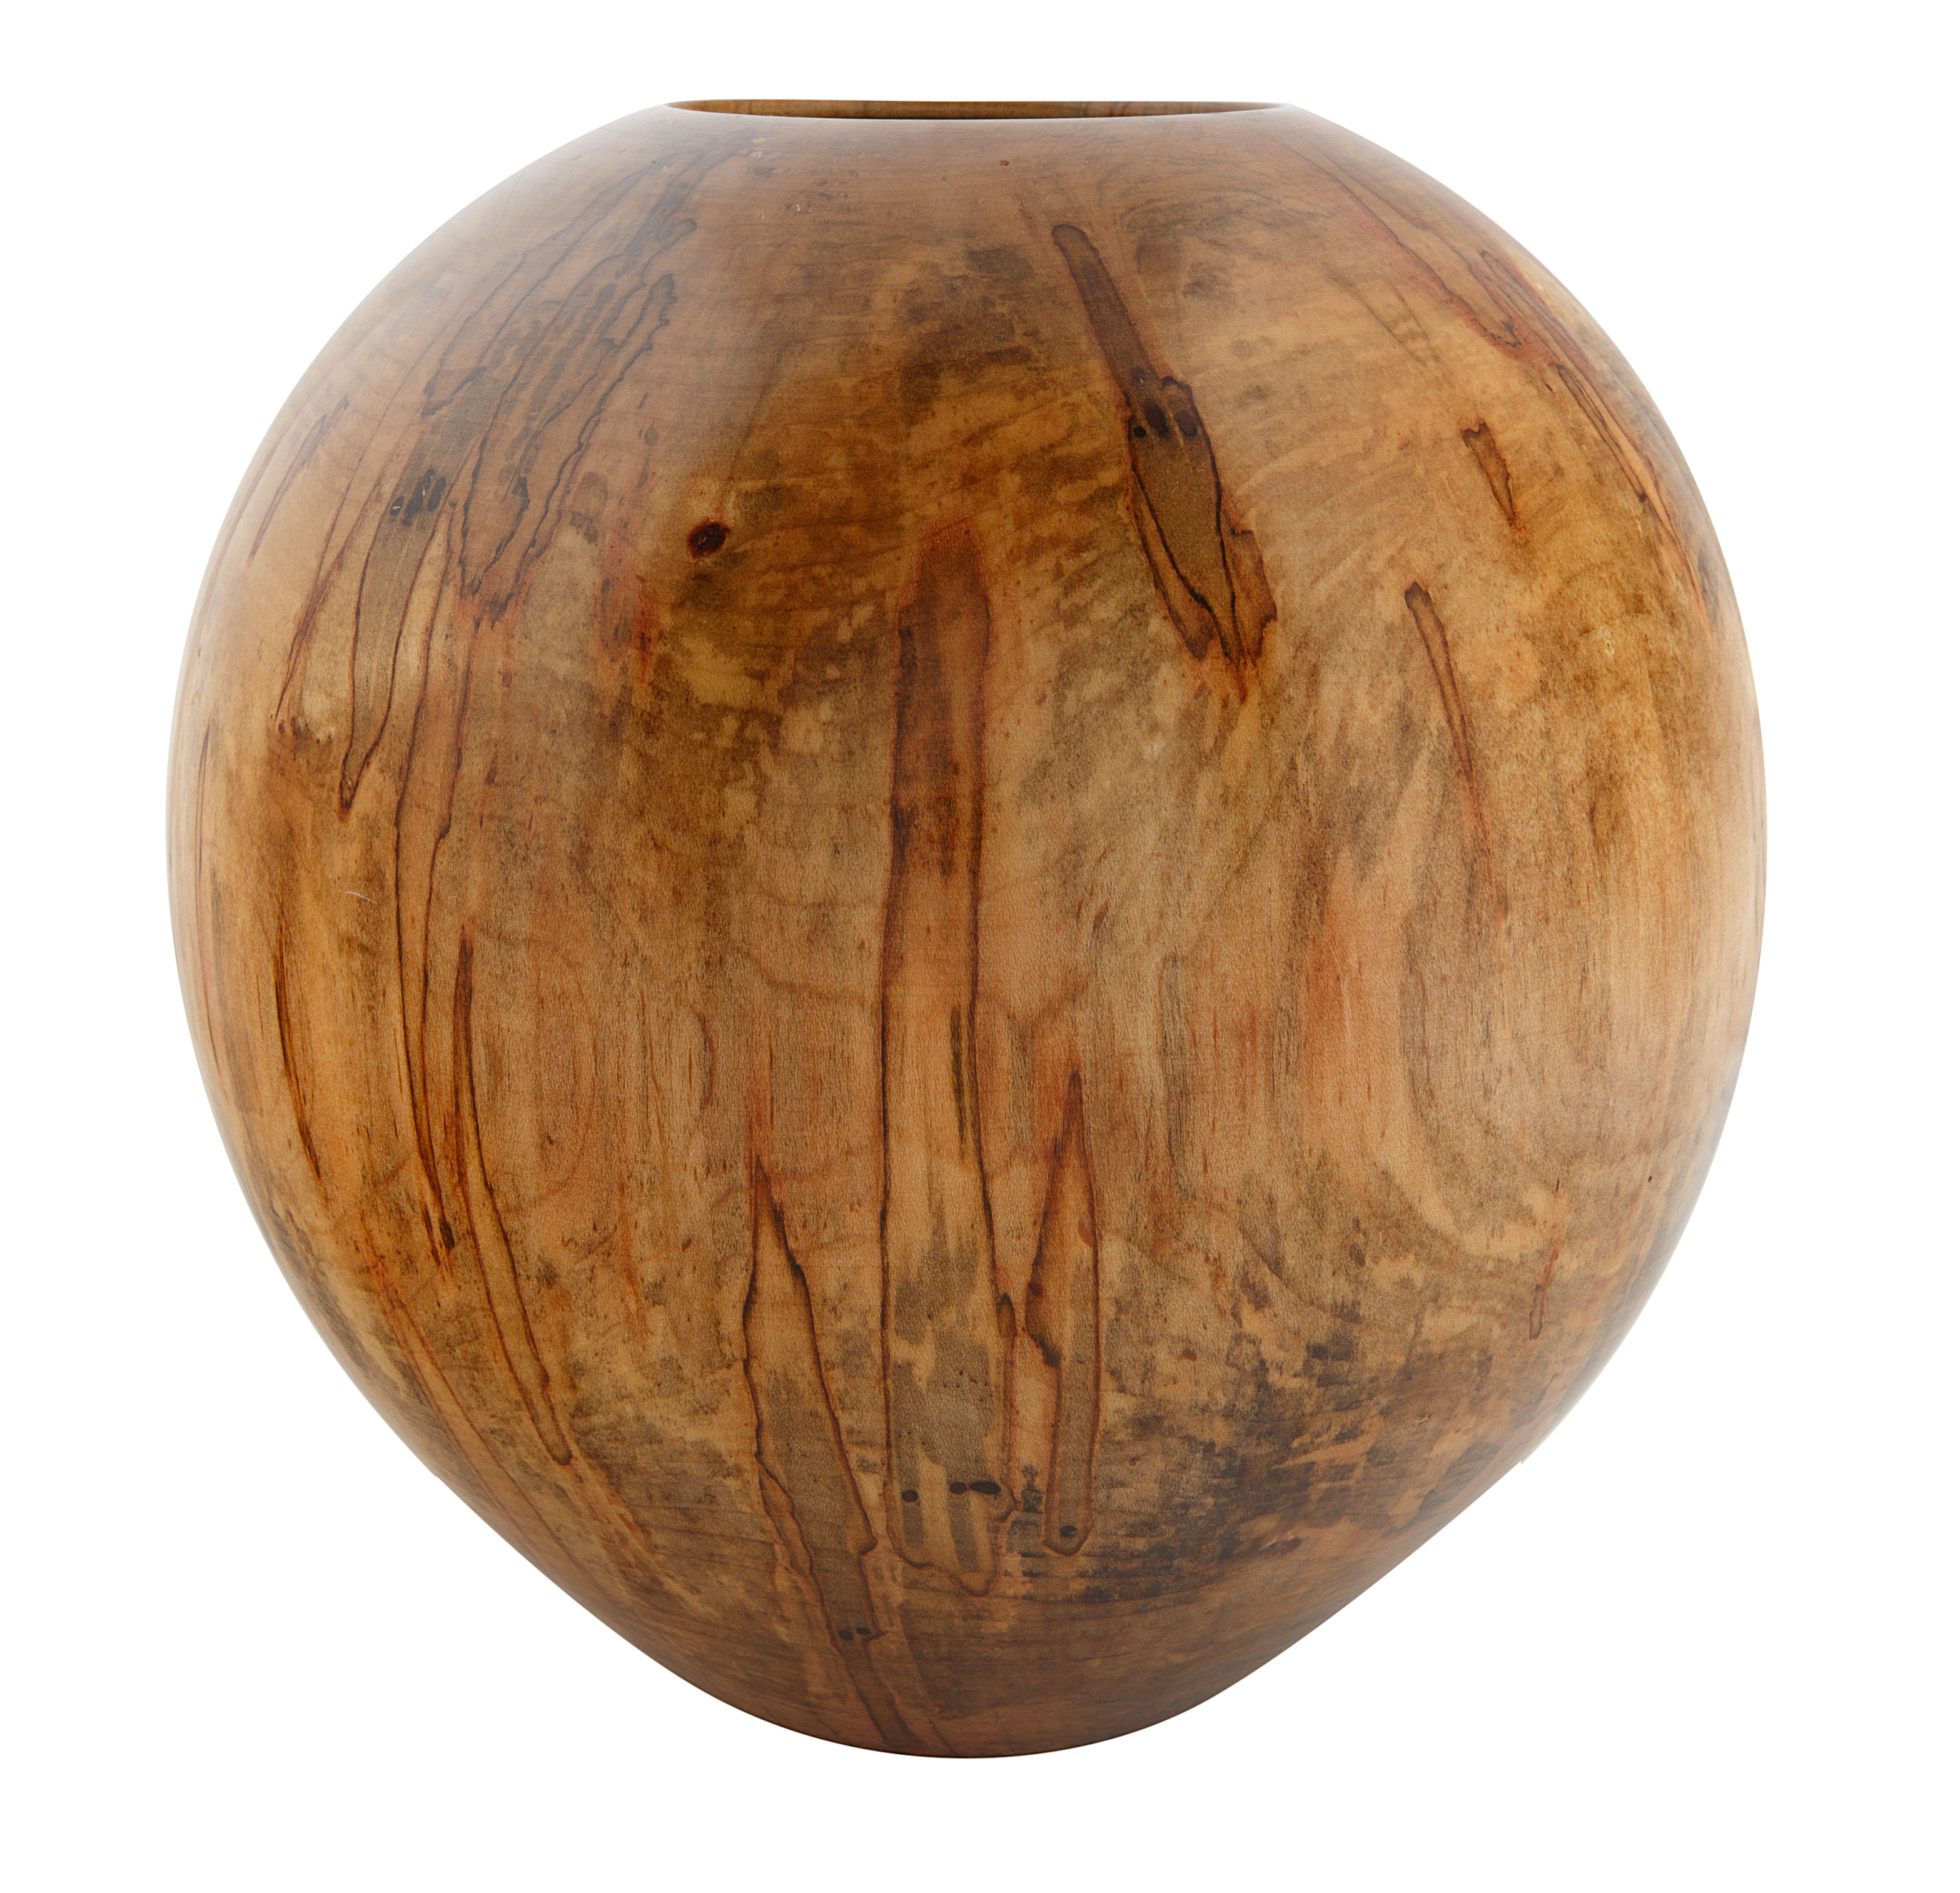 CIRCA 1991 SWAMP RED MAPLE VASE BY PHILIP MOULTHROP (AMERICAN B. 1947) - Image 3 of 6